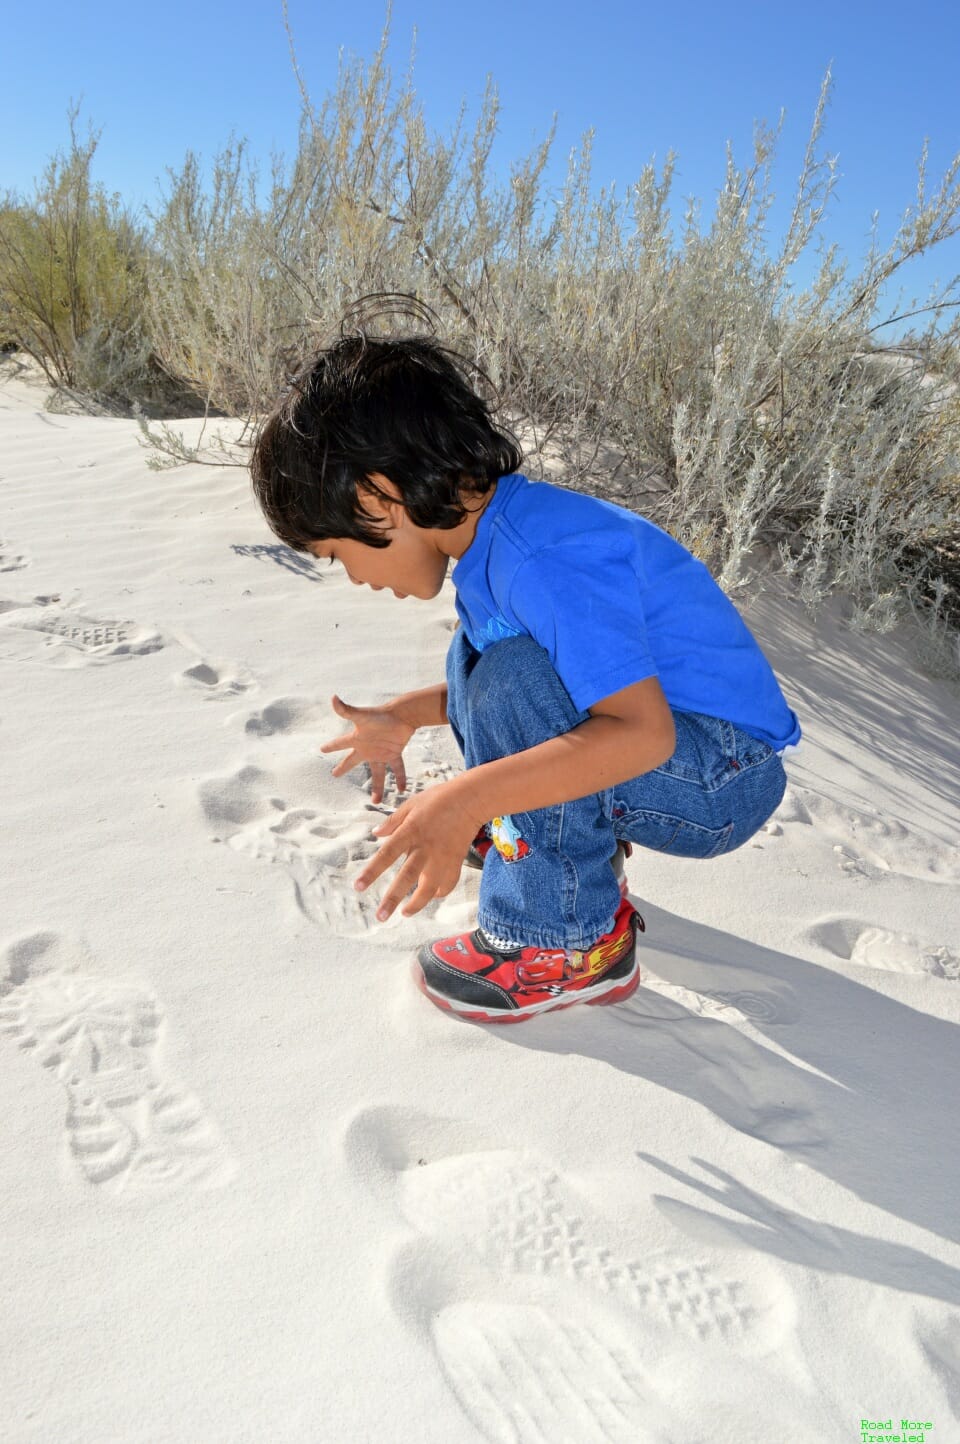 A child's wonderment at the sand